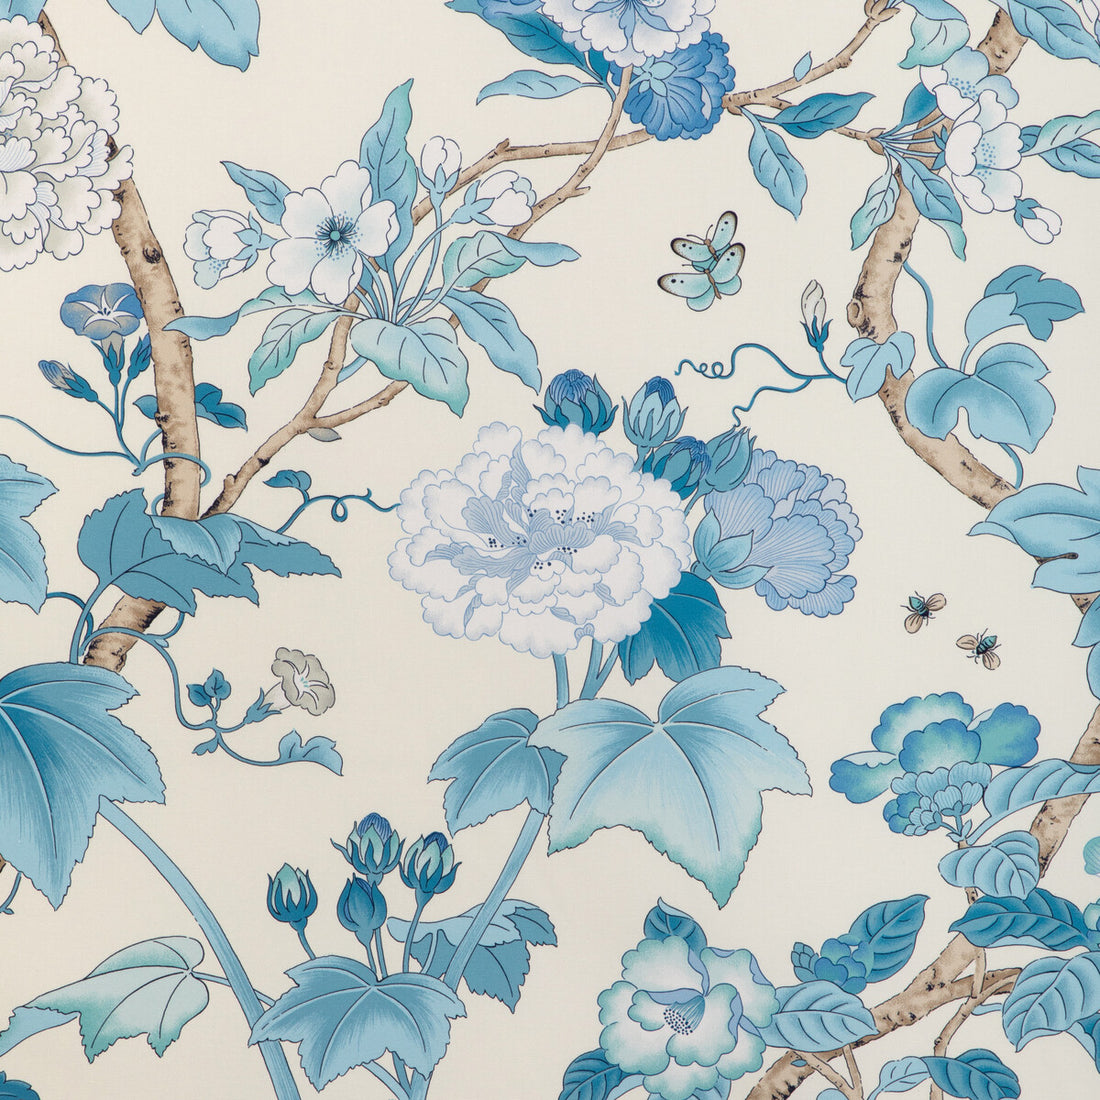 Gardenia Print fabric in delft/sky color - pattern 2023143.155.0 - by Lee Jofa in the Garden Walk collection